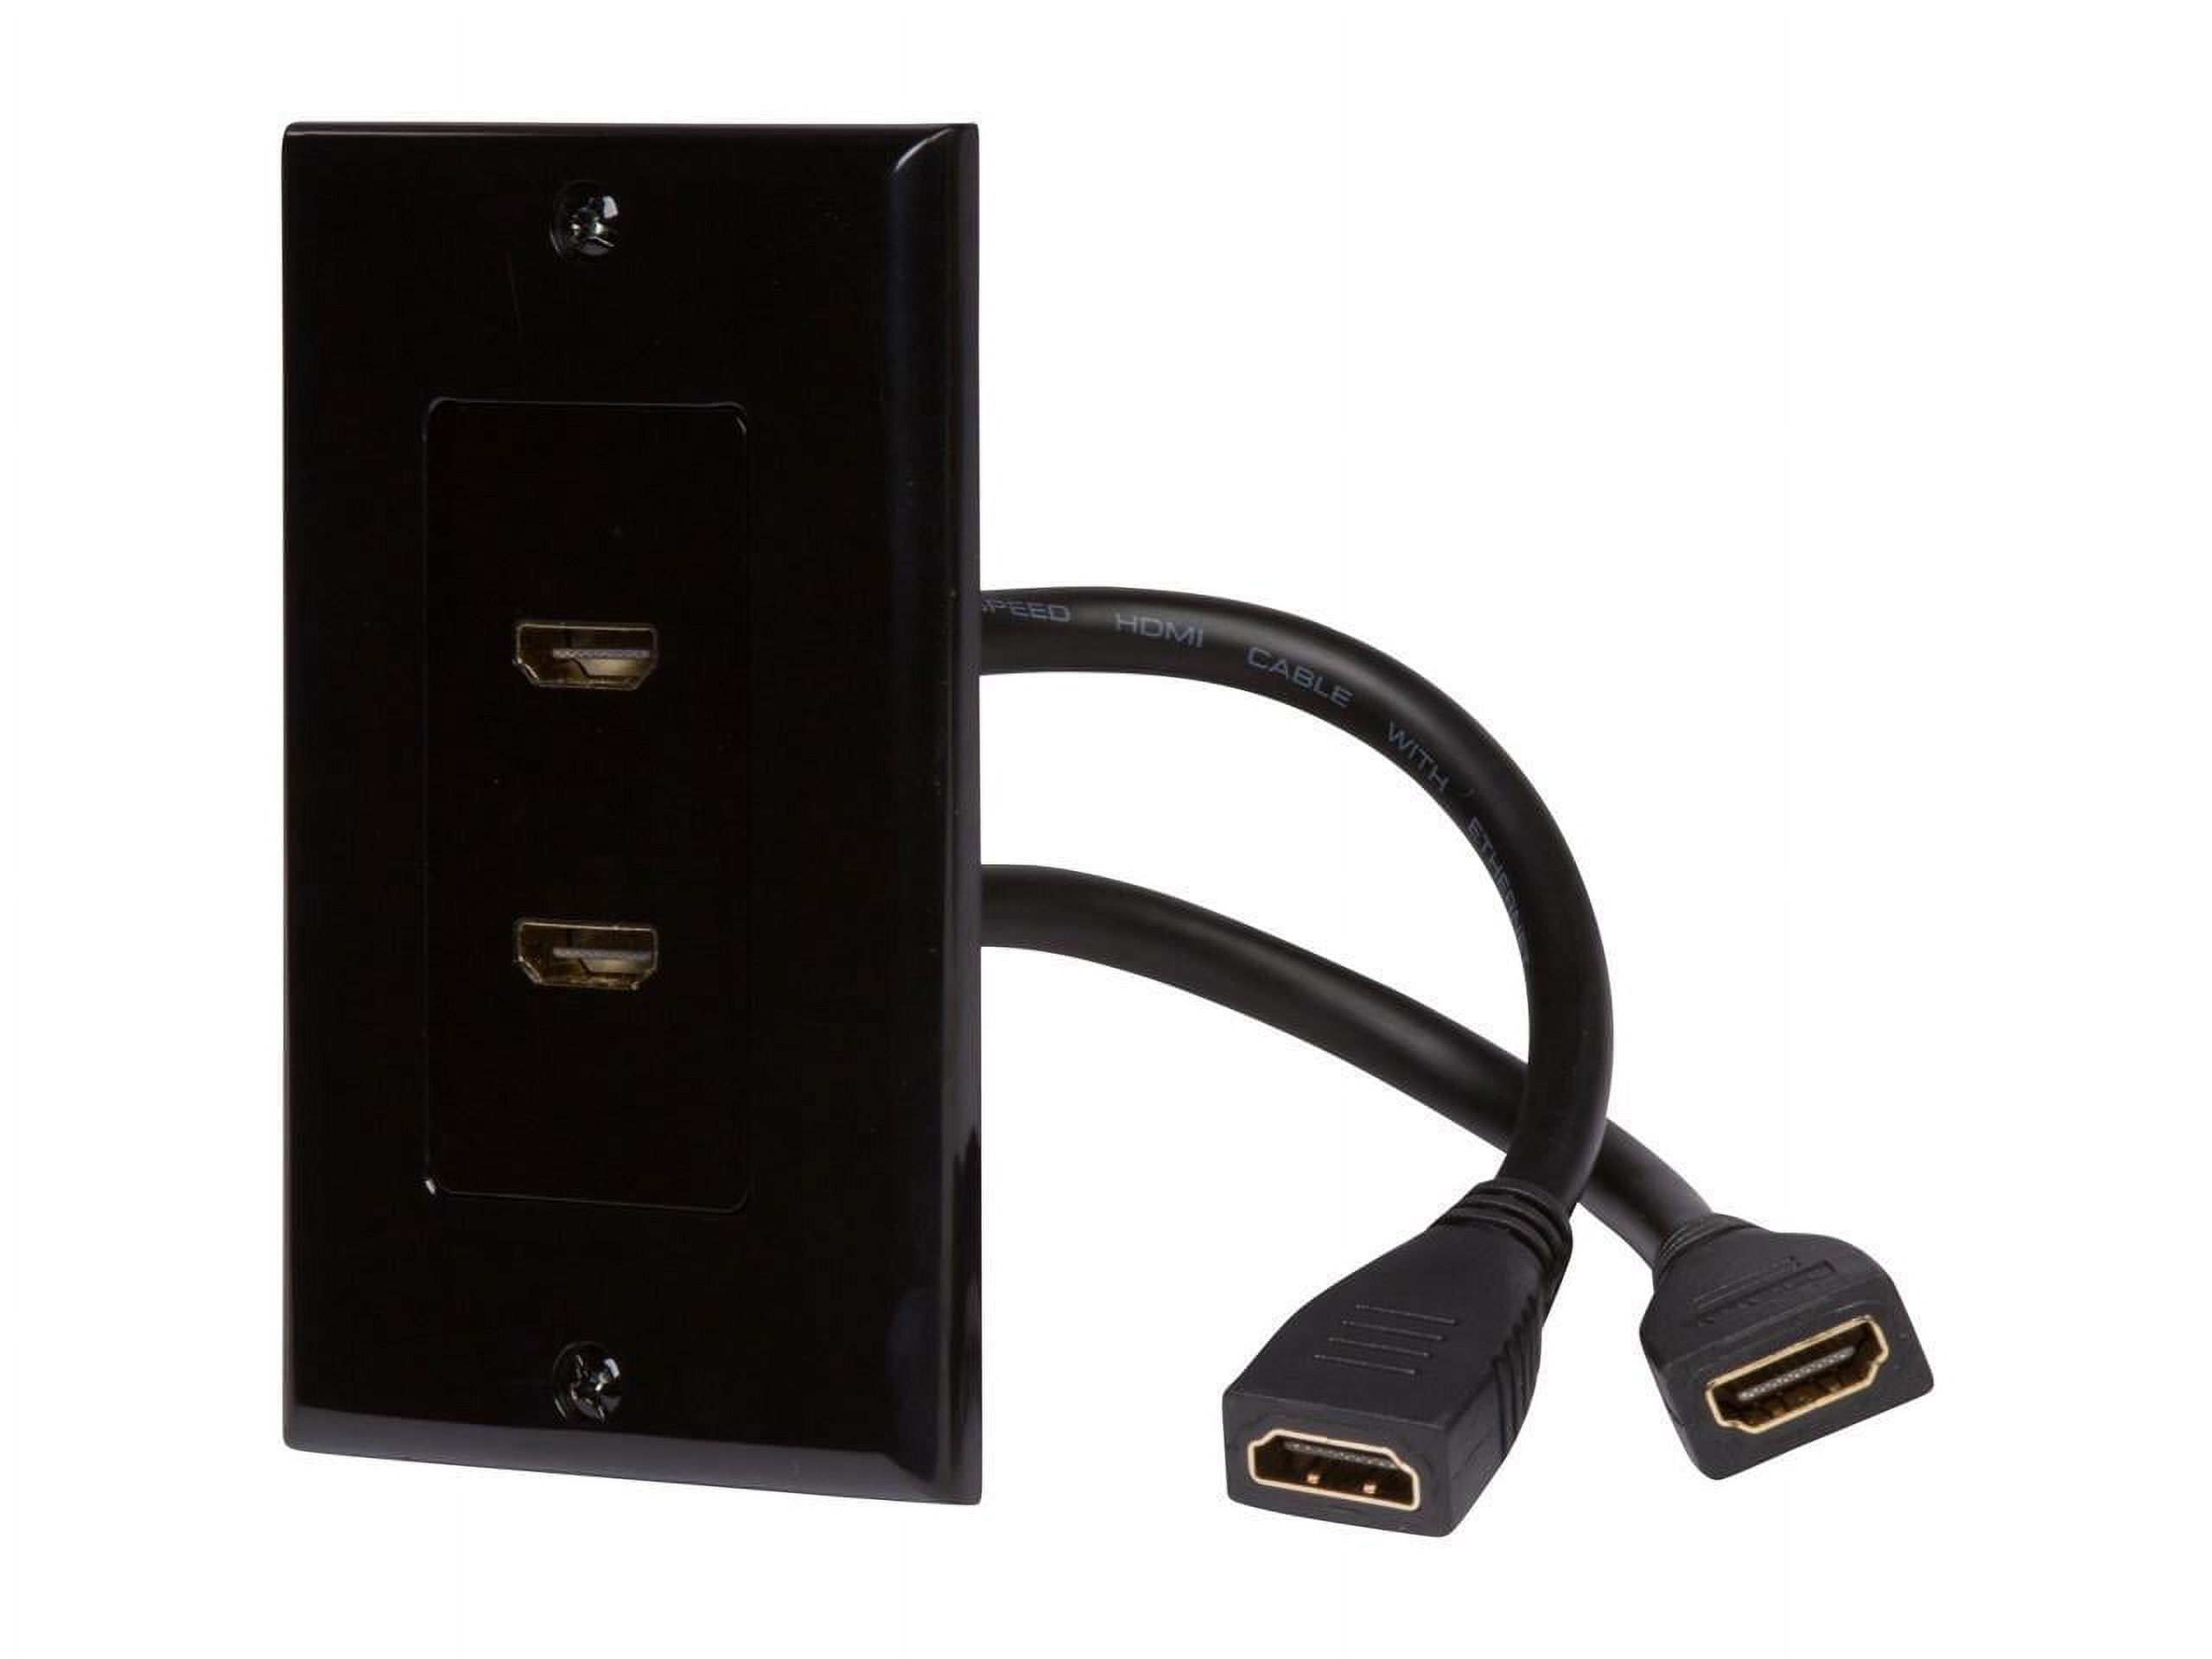 Buyer's Point HDMI Wall Plate[UL Listed] 2 Port Insert with 6-Inch Builtin Flexible Hi-Speed HDMI Cable with Ethernet Decora Style 2-Piece Pigtail Jack/Plug for Dual Outlet Port Pack of 25 Black Kit - image 5 of 6